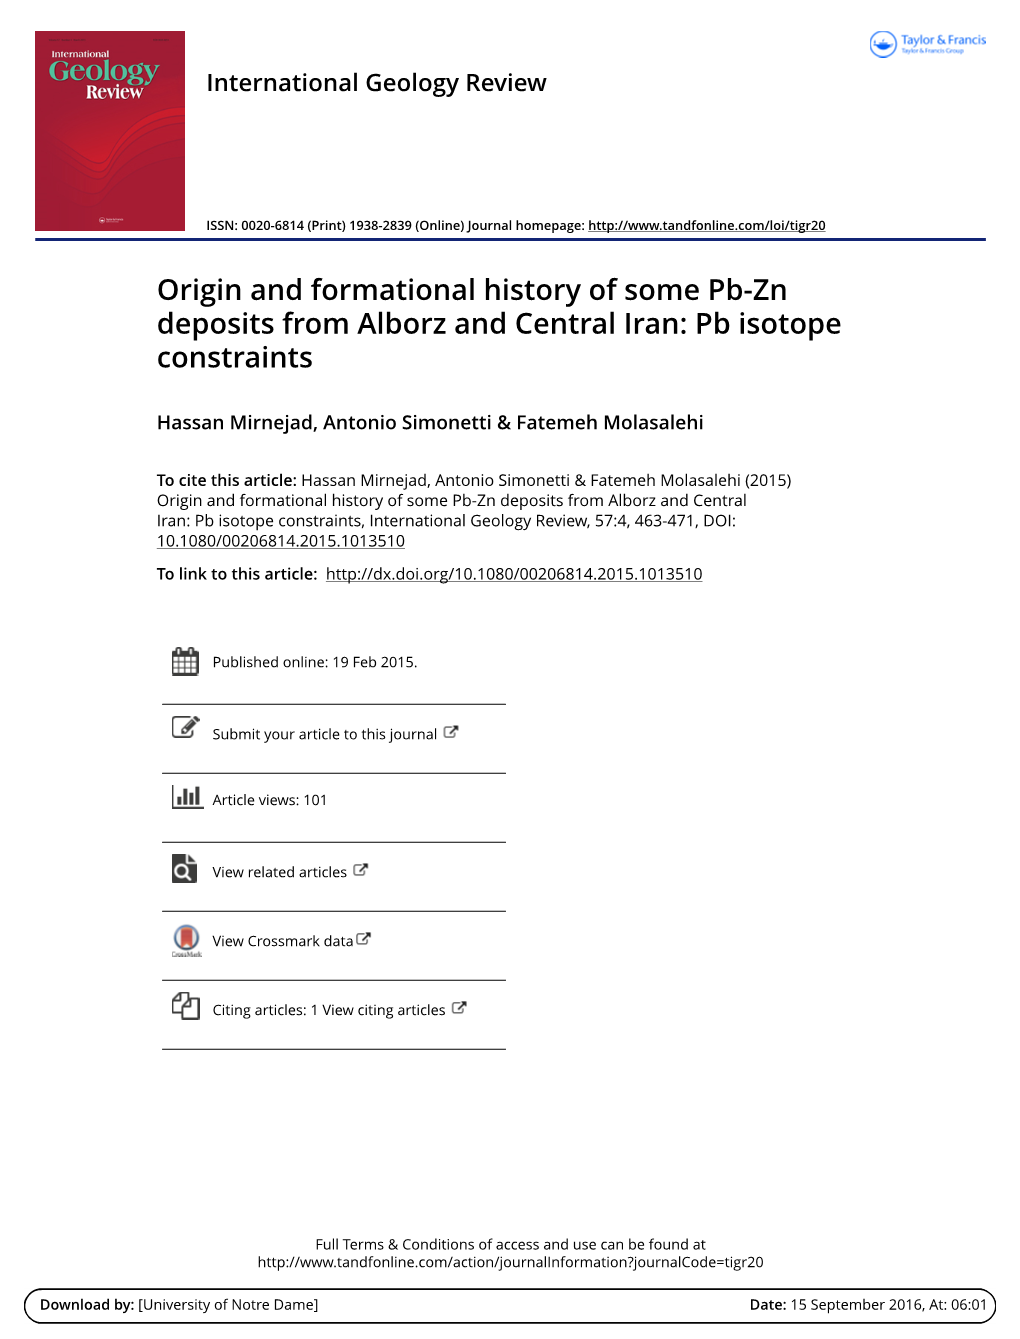 Origin and Formational History of Some Pb-Zn Deposits from Alborz and Central Iran: Pb Isotope Constraints